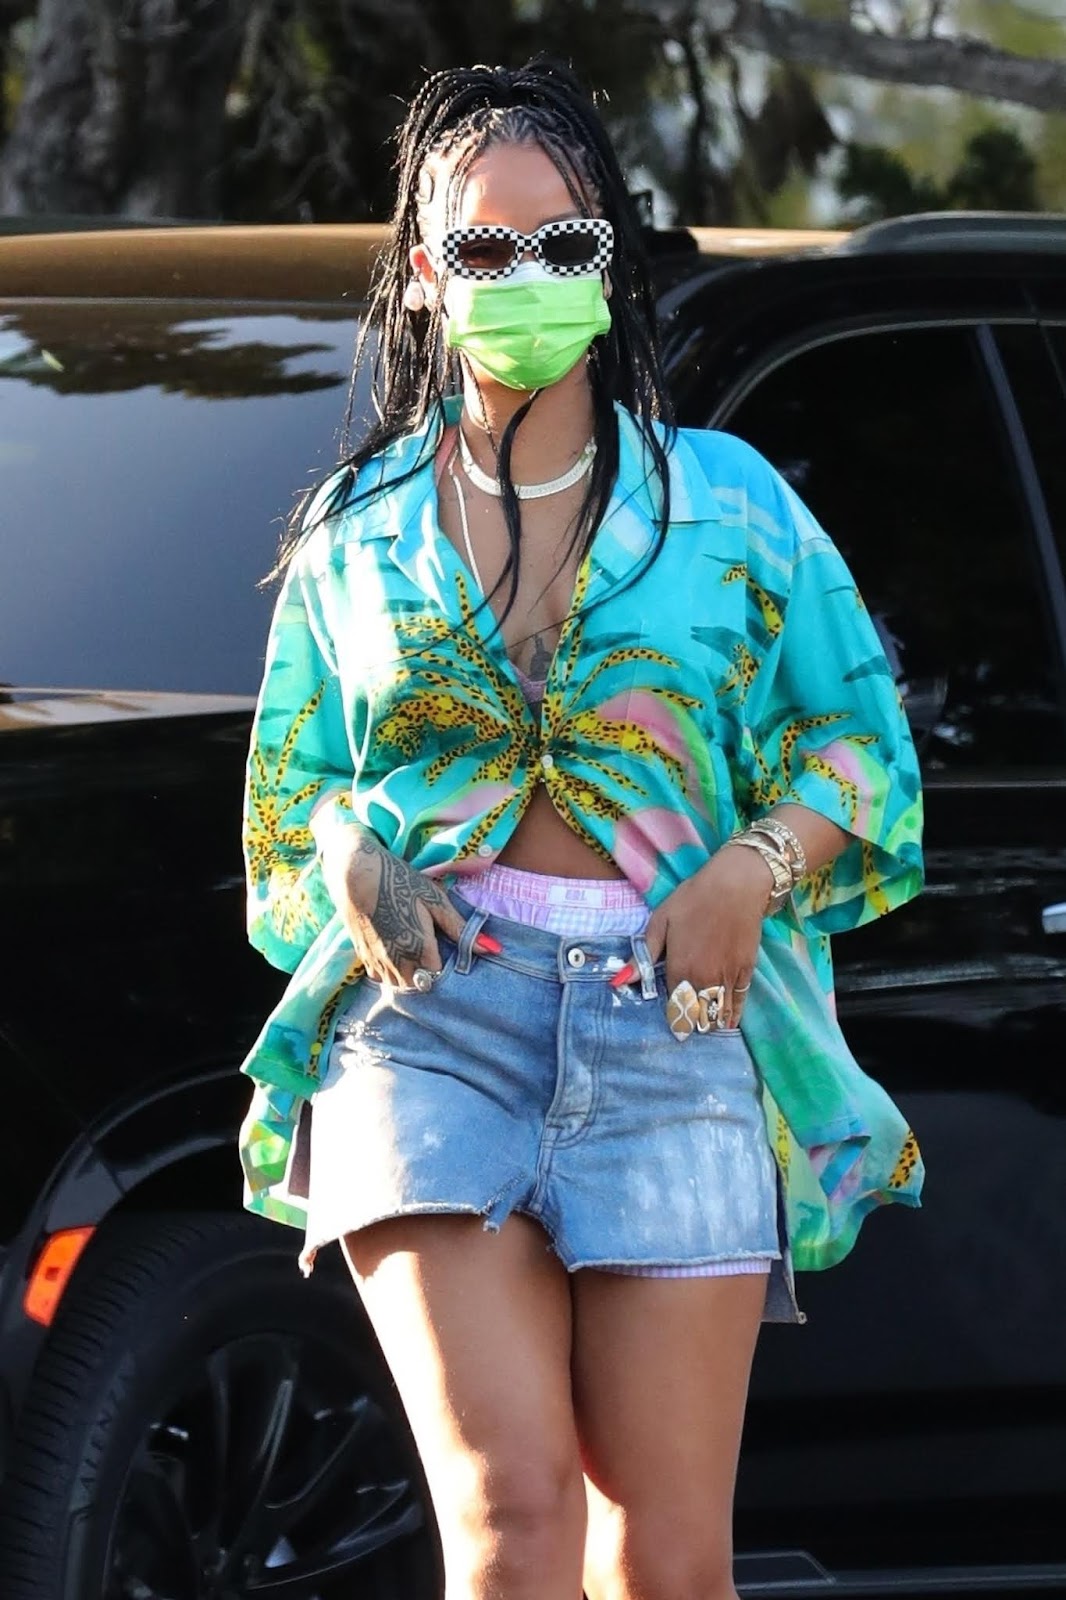 Rihanna is spotted during a grocery run at Bristol in tropical-themed shirt and micro blue jean skirt